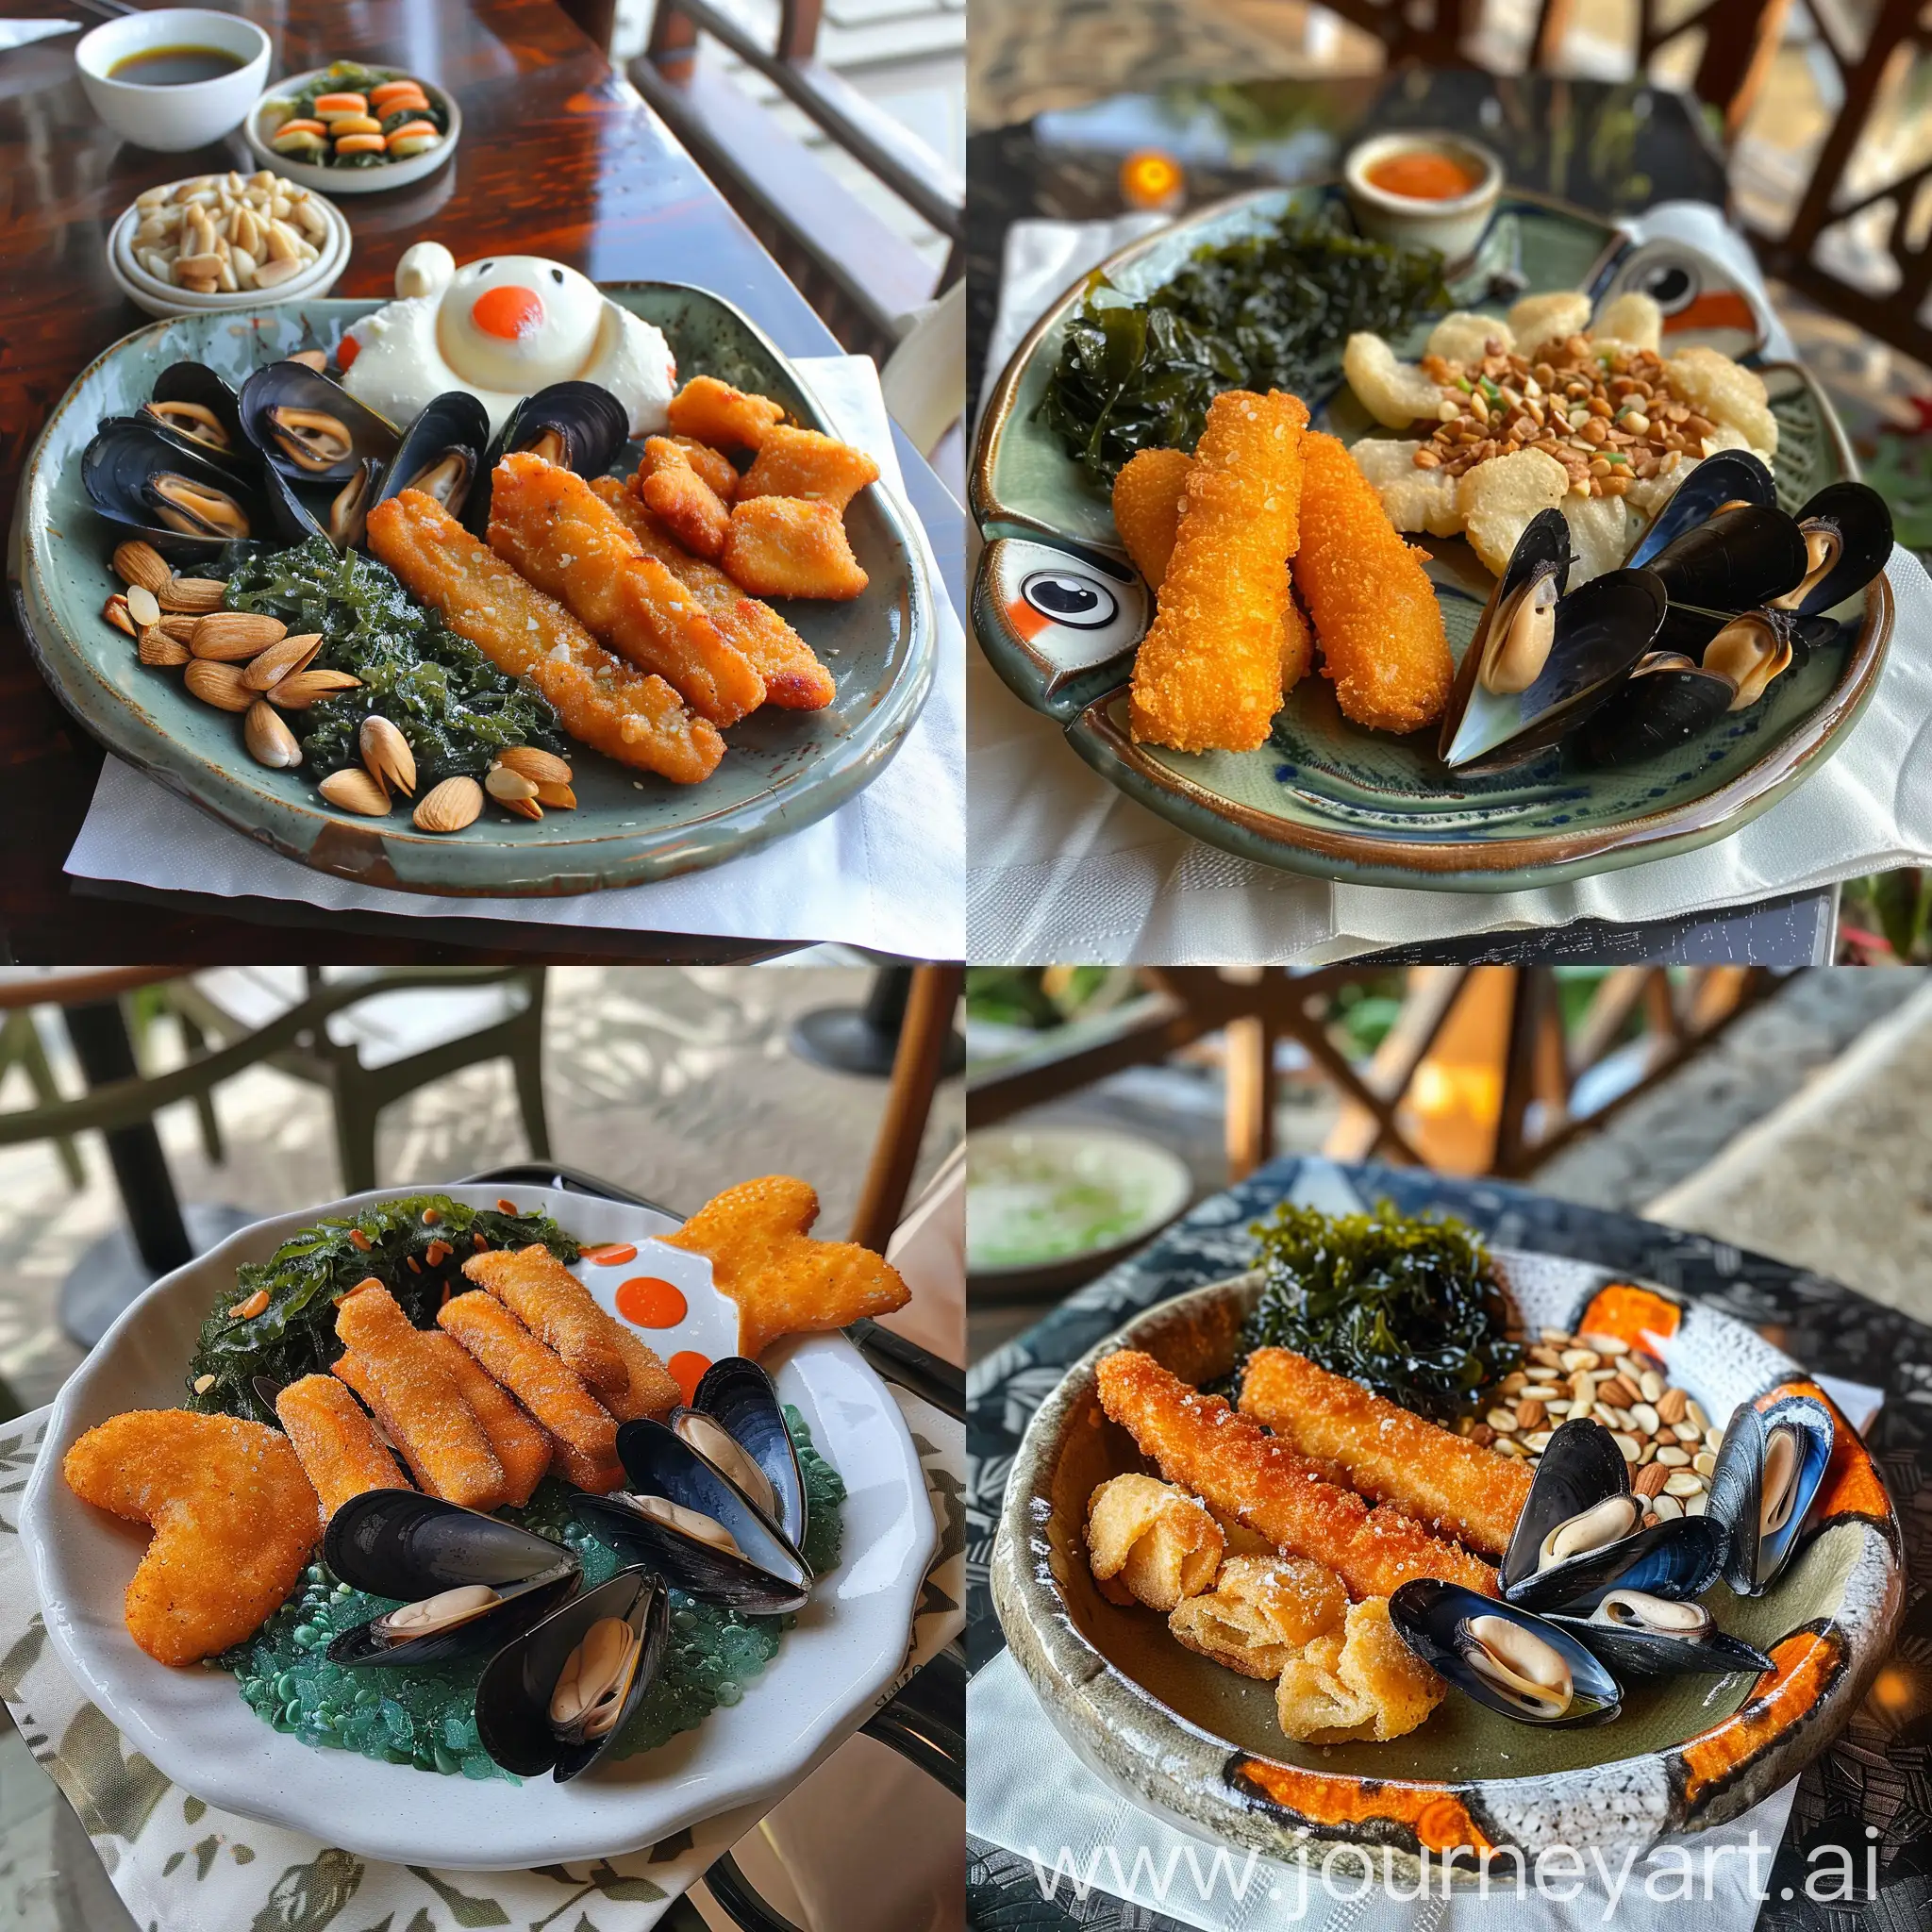 Hawaiian-Cafe-Delight-Clown-Fish-Plate-with-Fried-Fish-Sticks-Seaweed-Almonds-and-Mussels